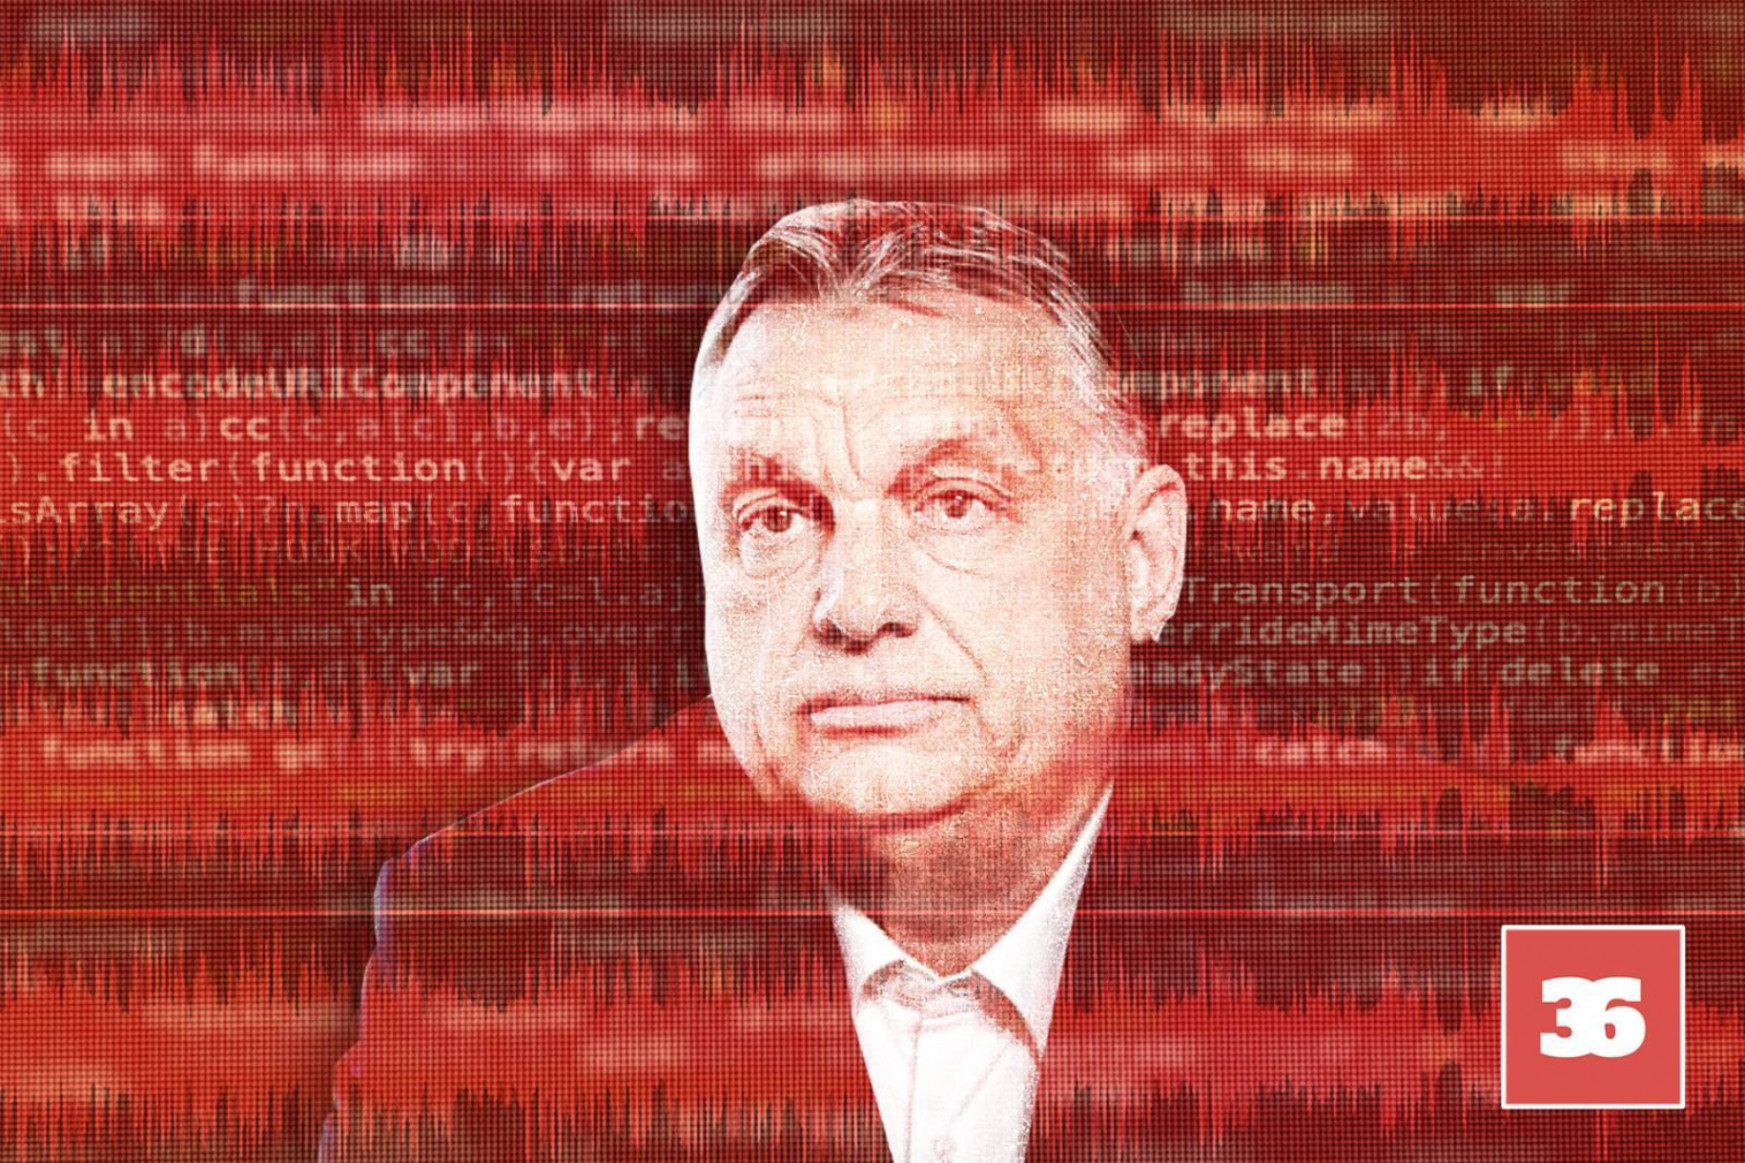 Hungarian journalists and critics of Orbán were targeted with Pegasus, a powerful Israeli cyberweapon